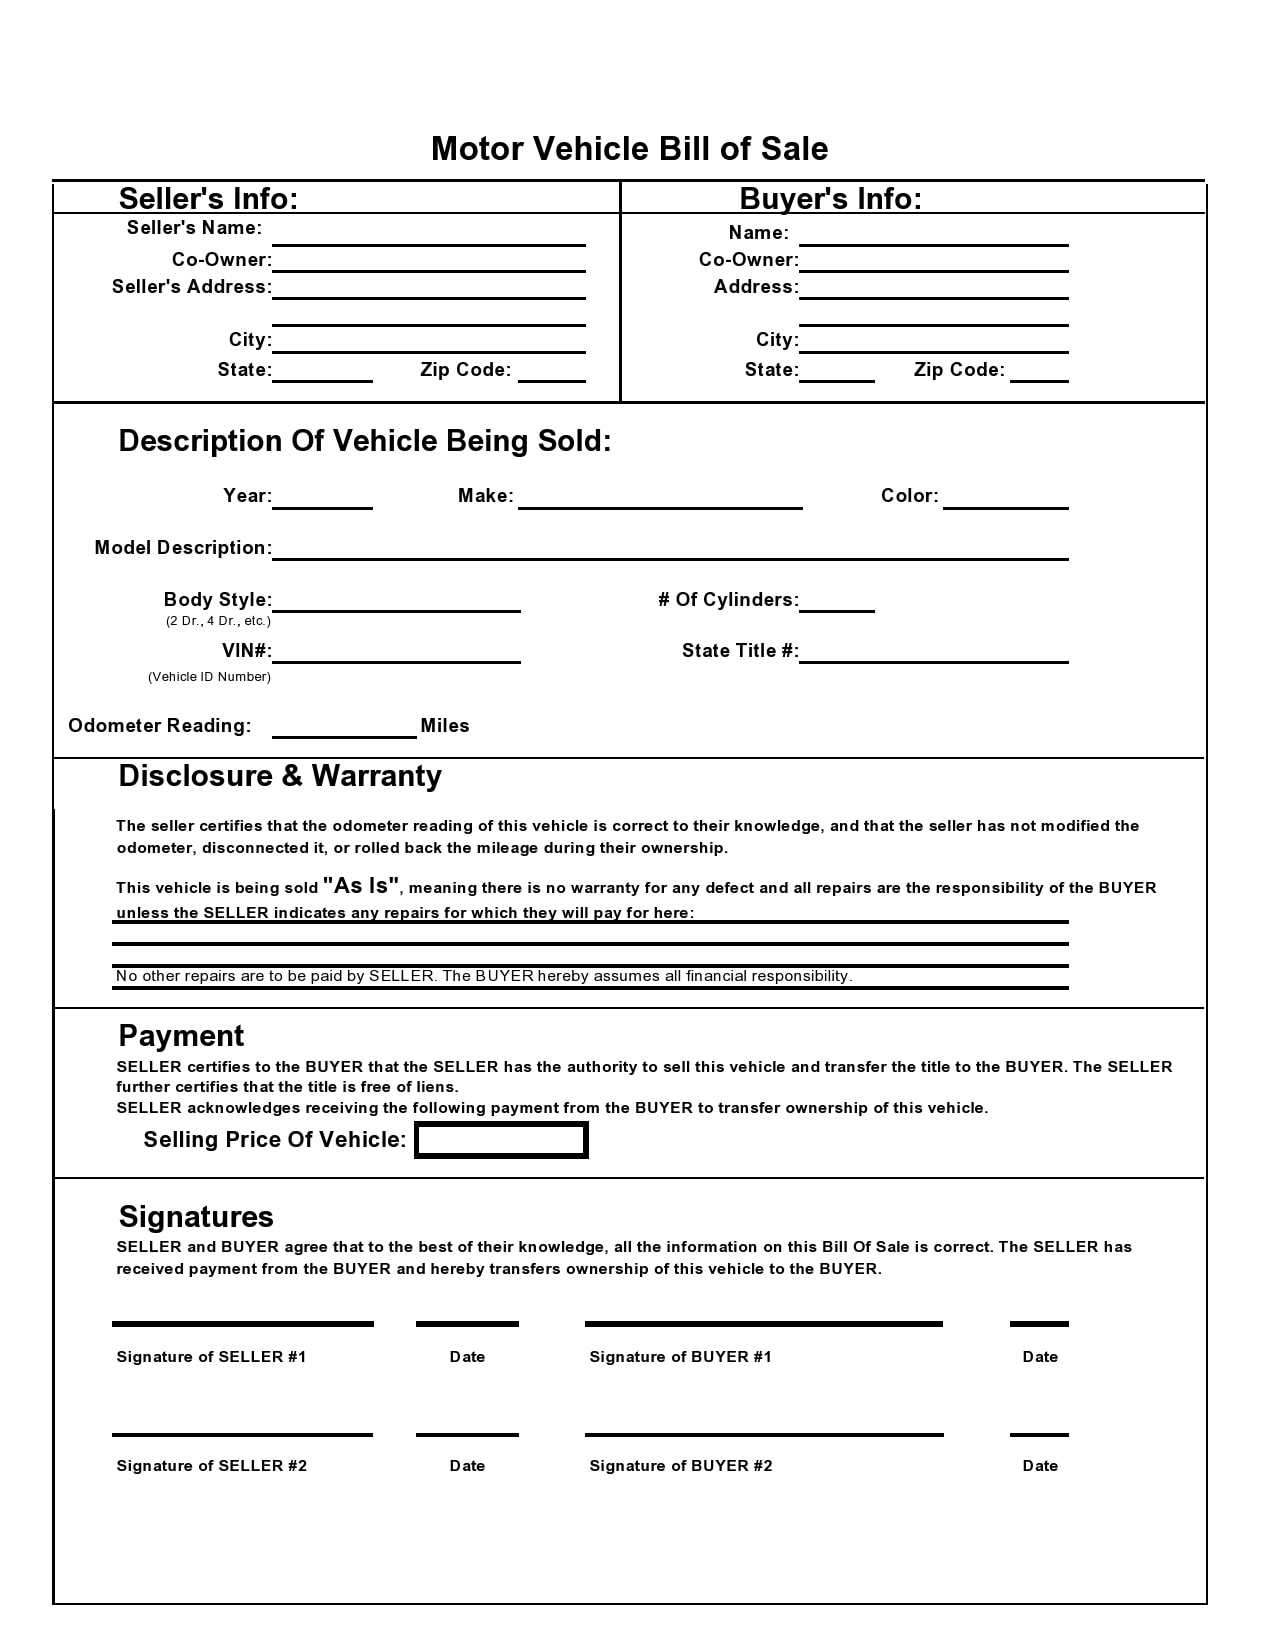 free-motorcycle-bill-of-sale-form-pdf-free-motorcycle-bill-of-sale